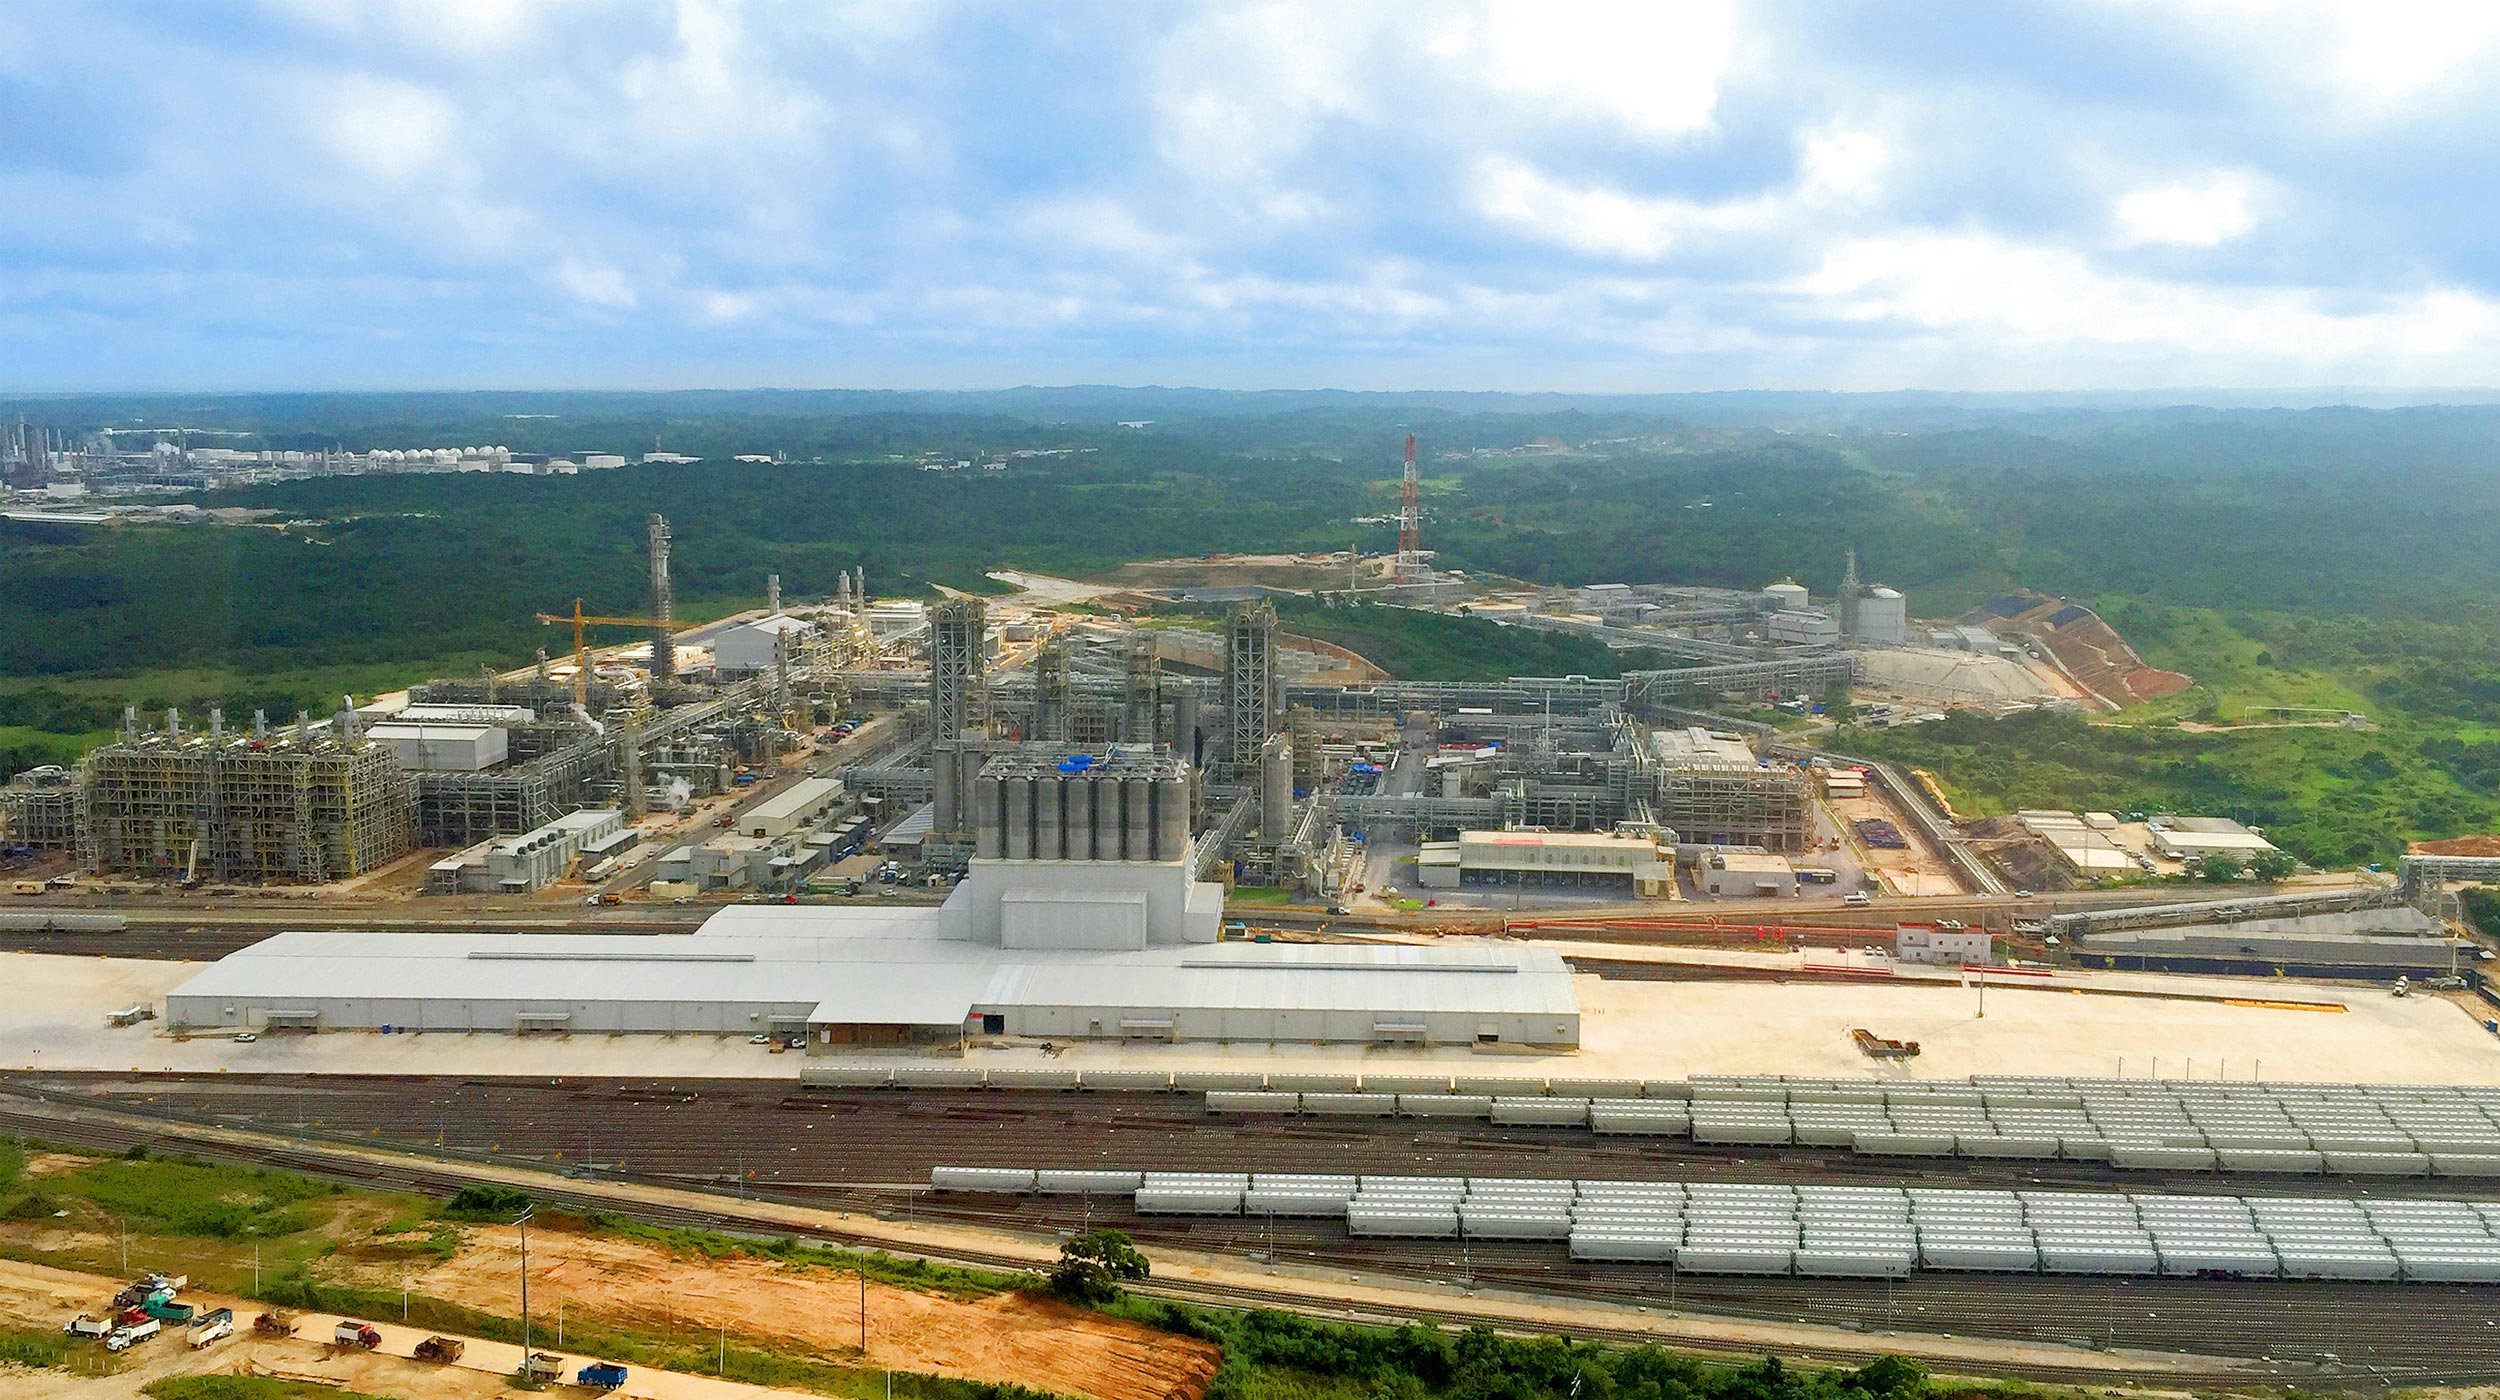 ULMA played a critical role in this project, which is the biggest ethylene production plant in all of Latin America.